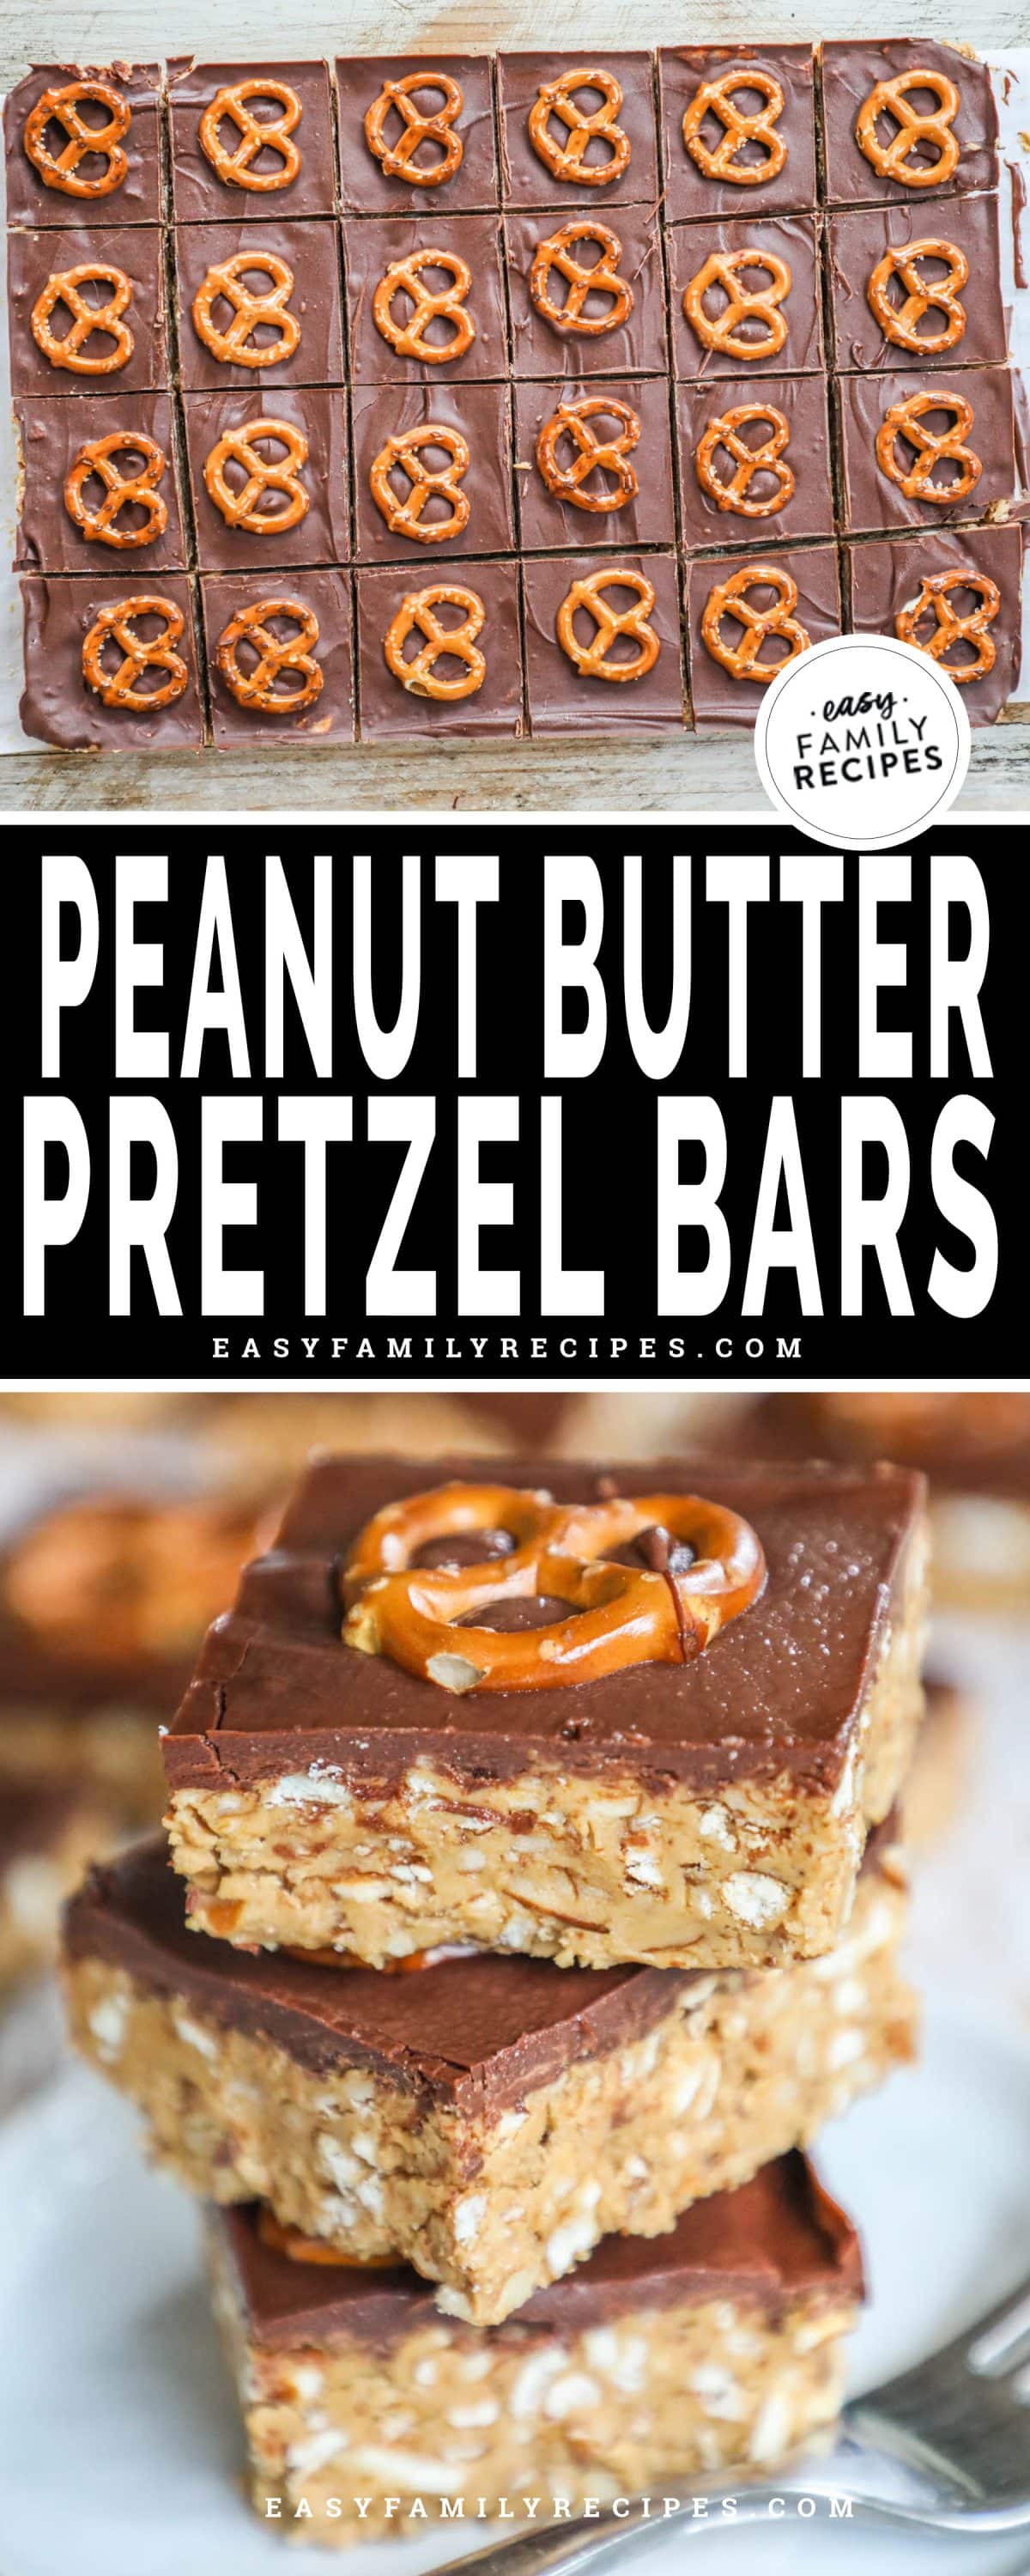 Peanut butter bars cut into squares in a pan and stacked on top of each other.